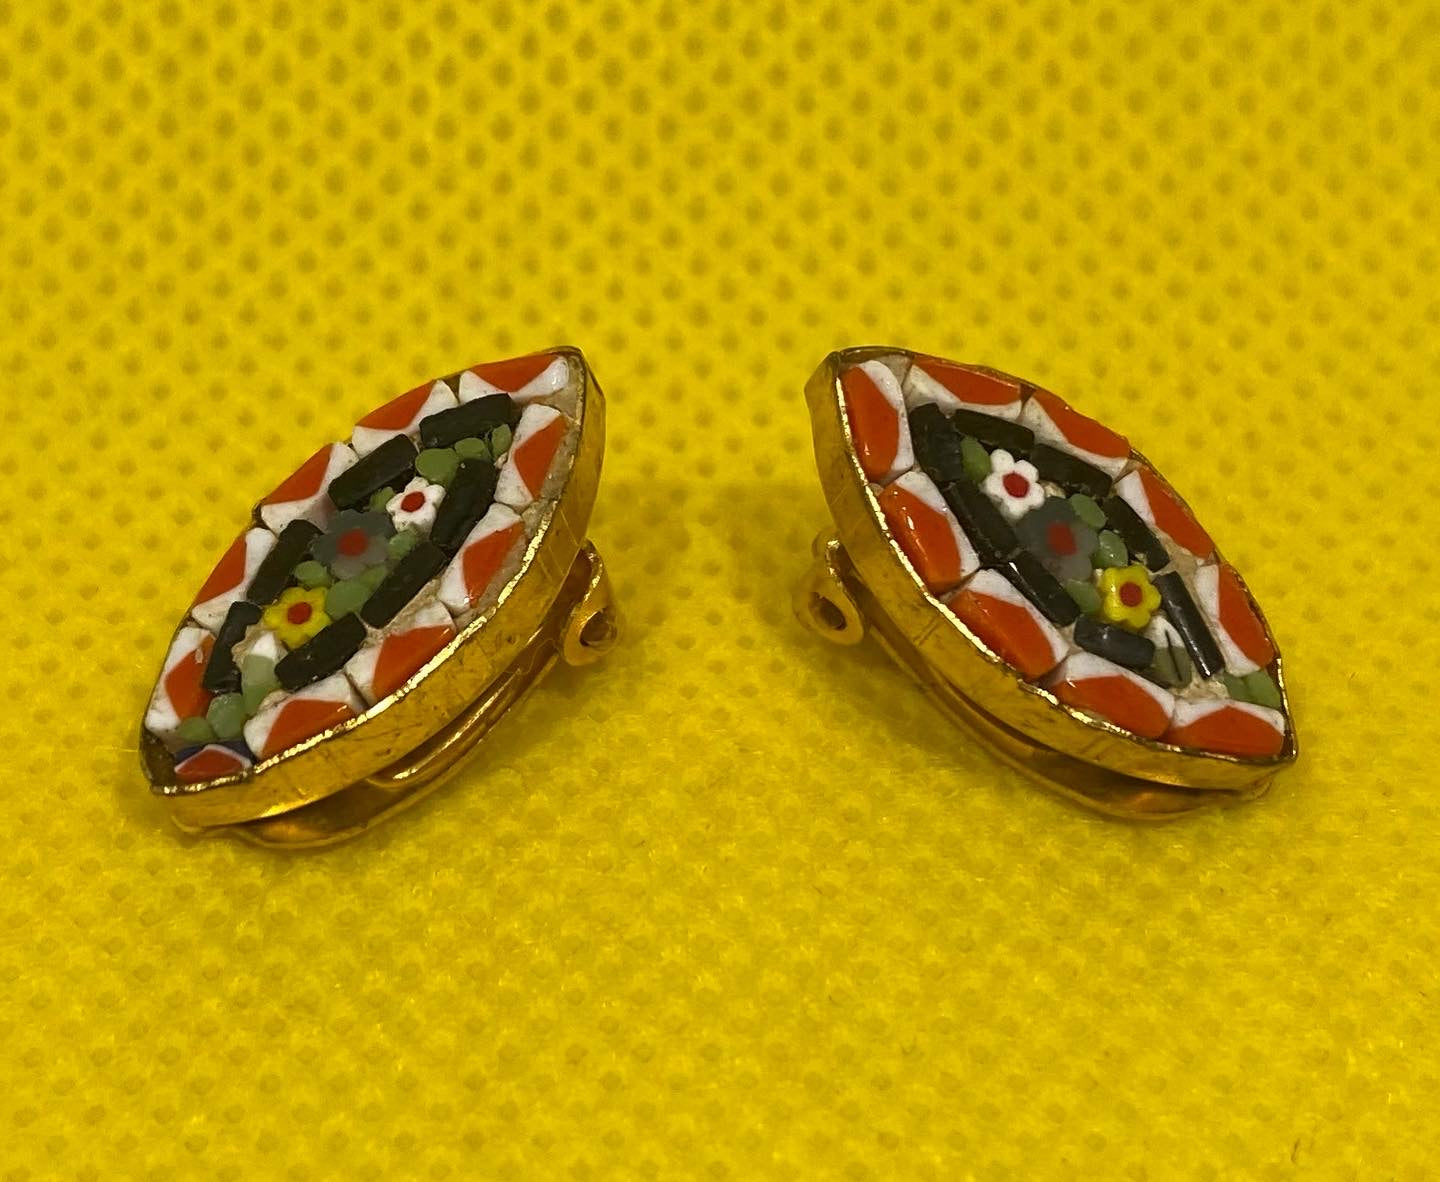 Beautiful pair of Italian vintage clip on Micromosaic oval earrings with a typical floral design.